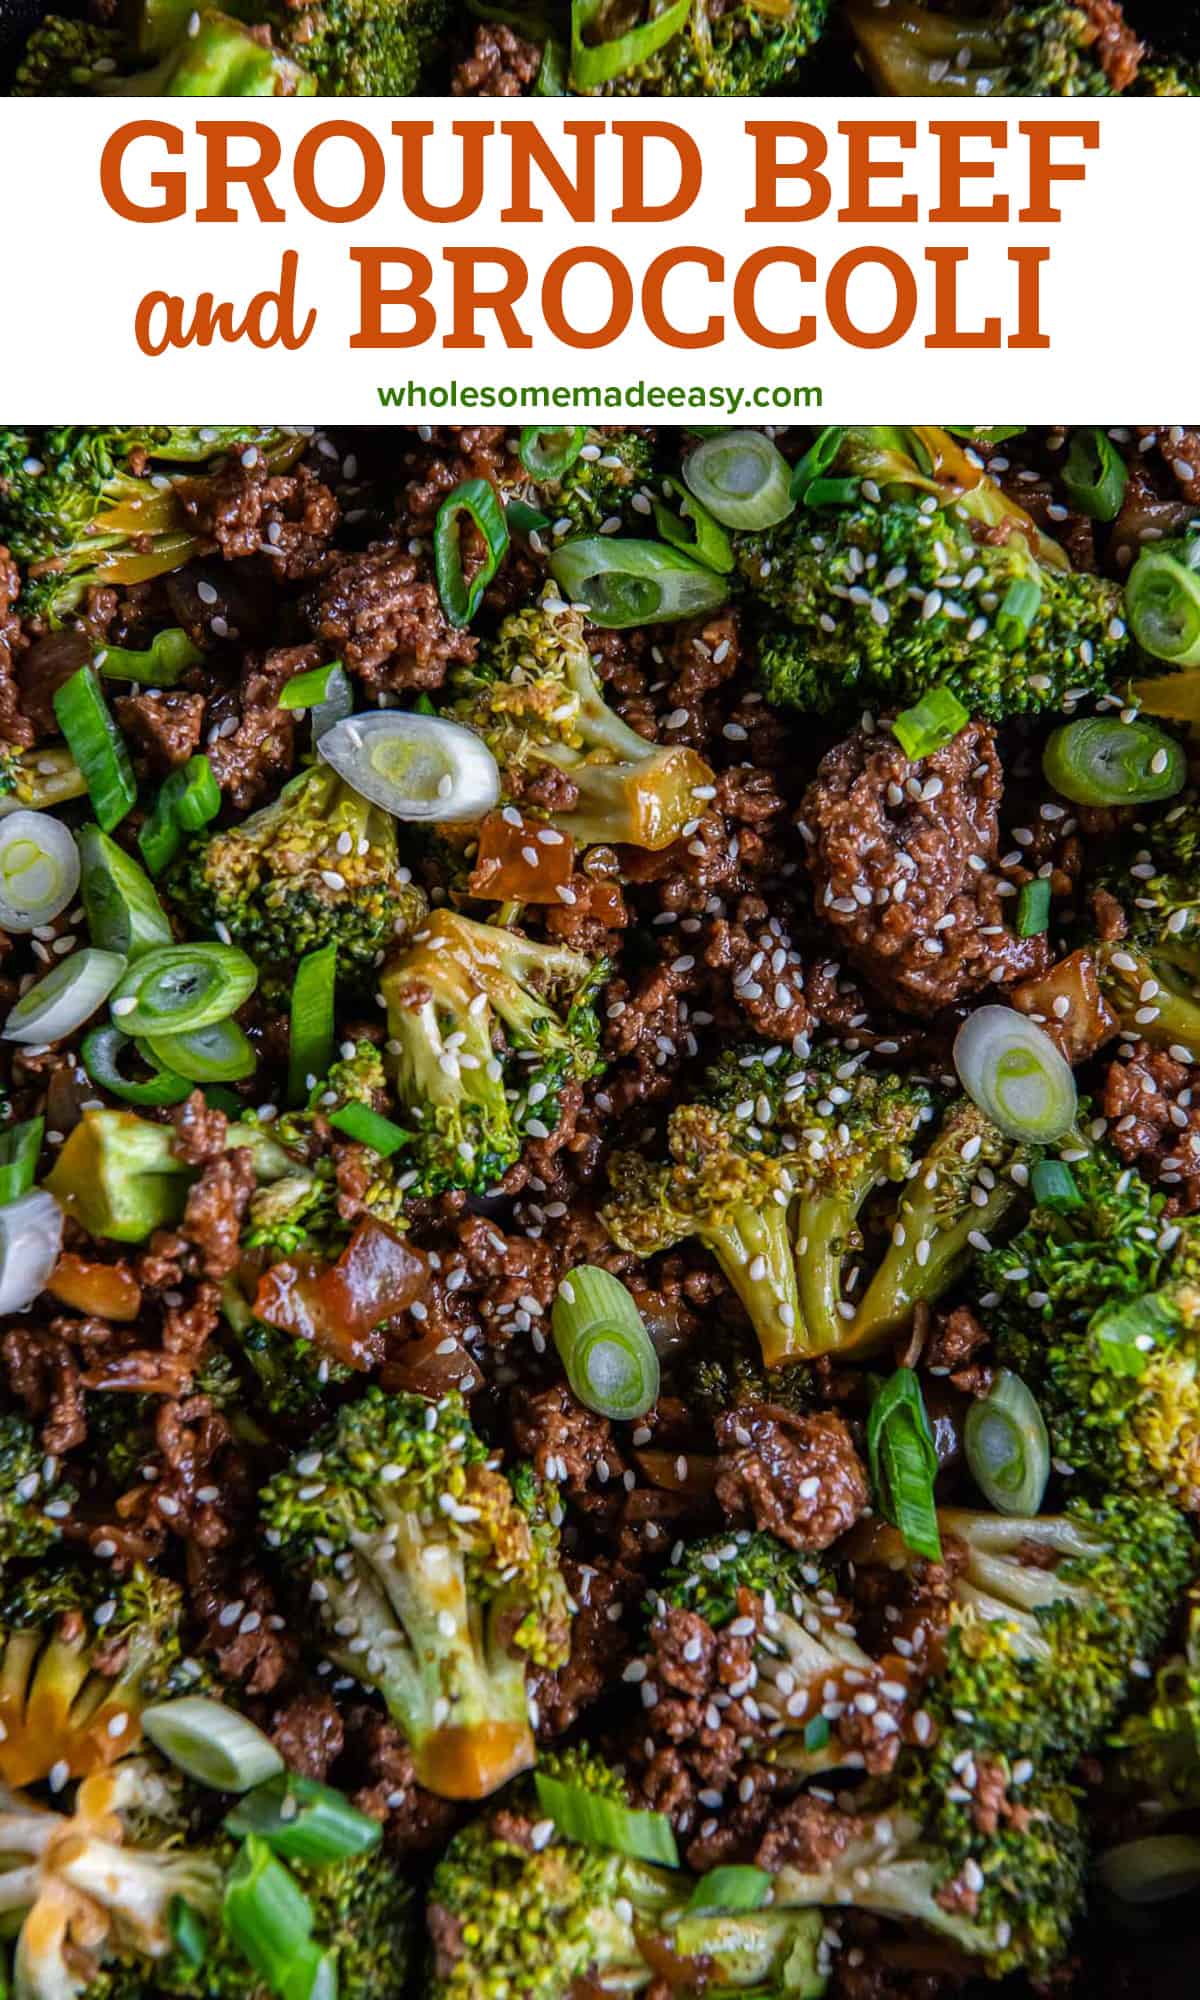 Cooked ground beef and broccoli with sesame seeds and green onions with text.